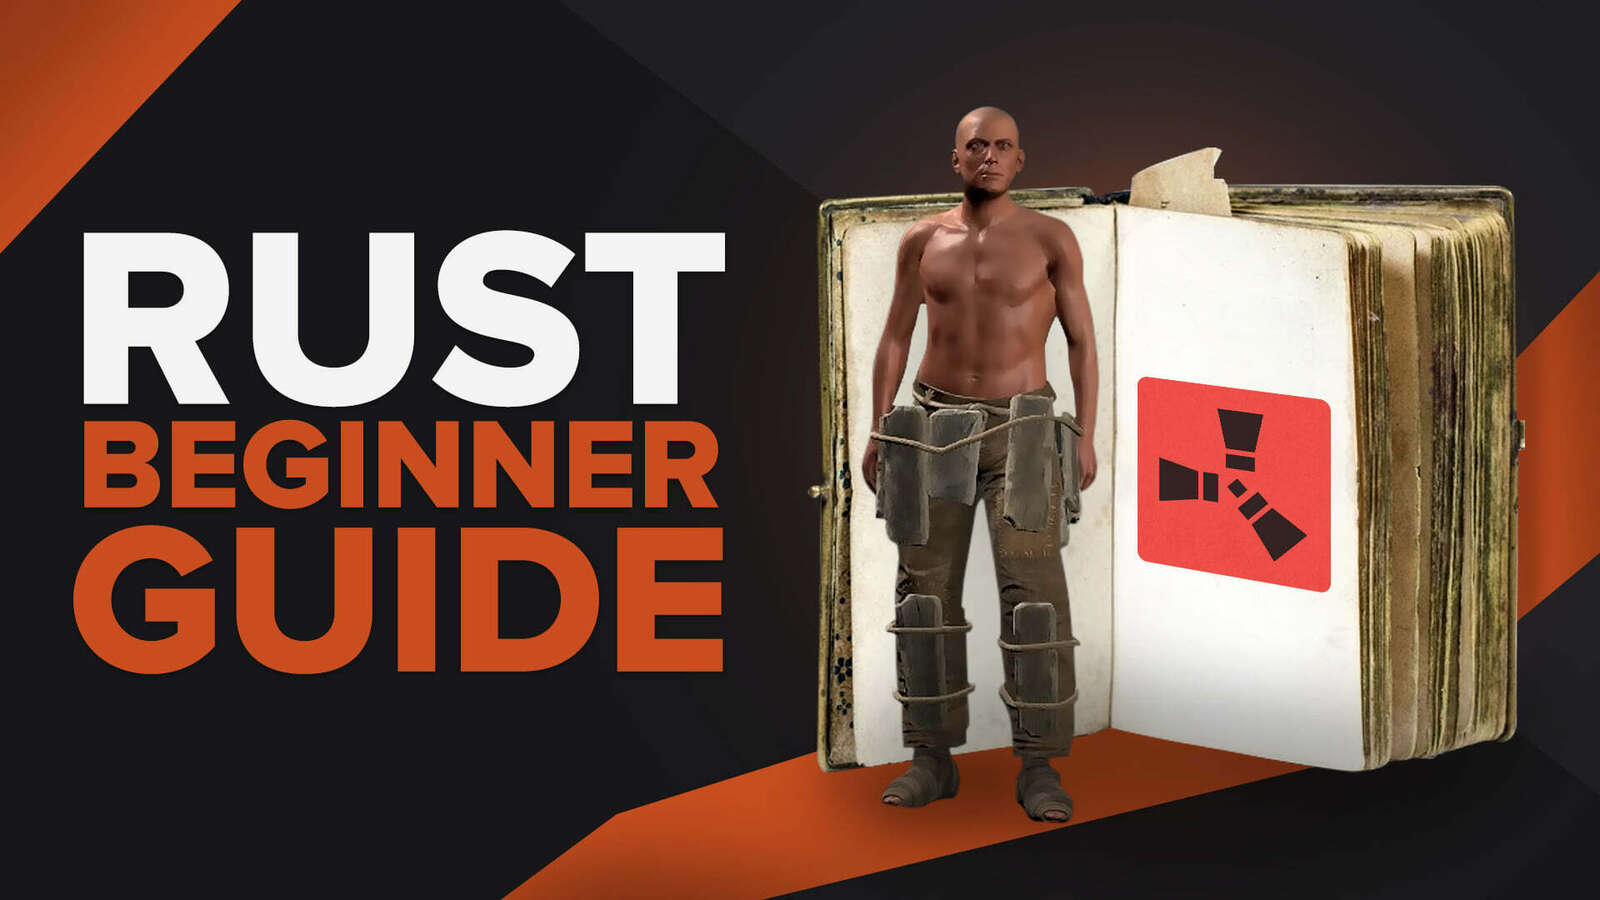 Rust Beginner Guide: Everything You Need to Know When Starting